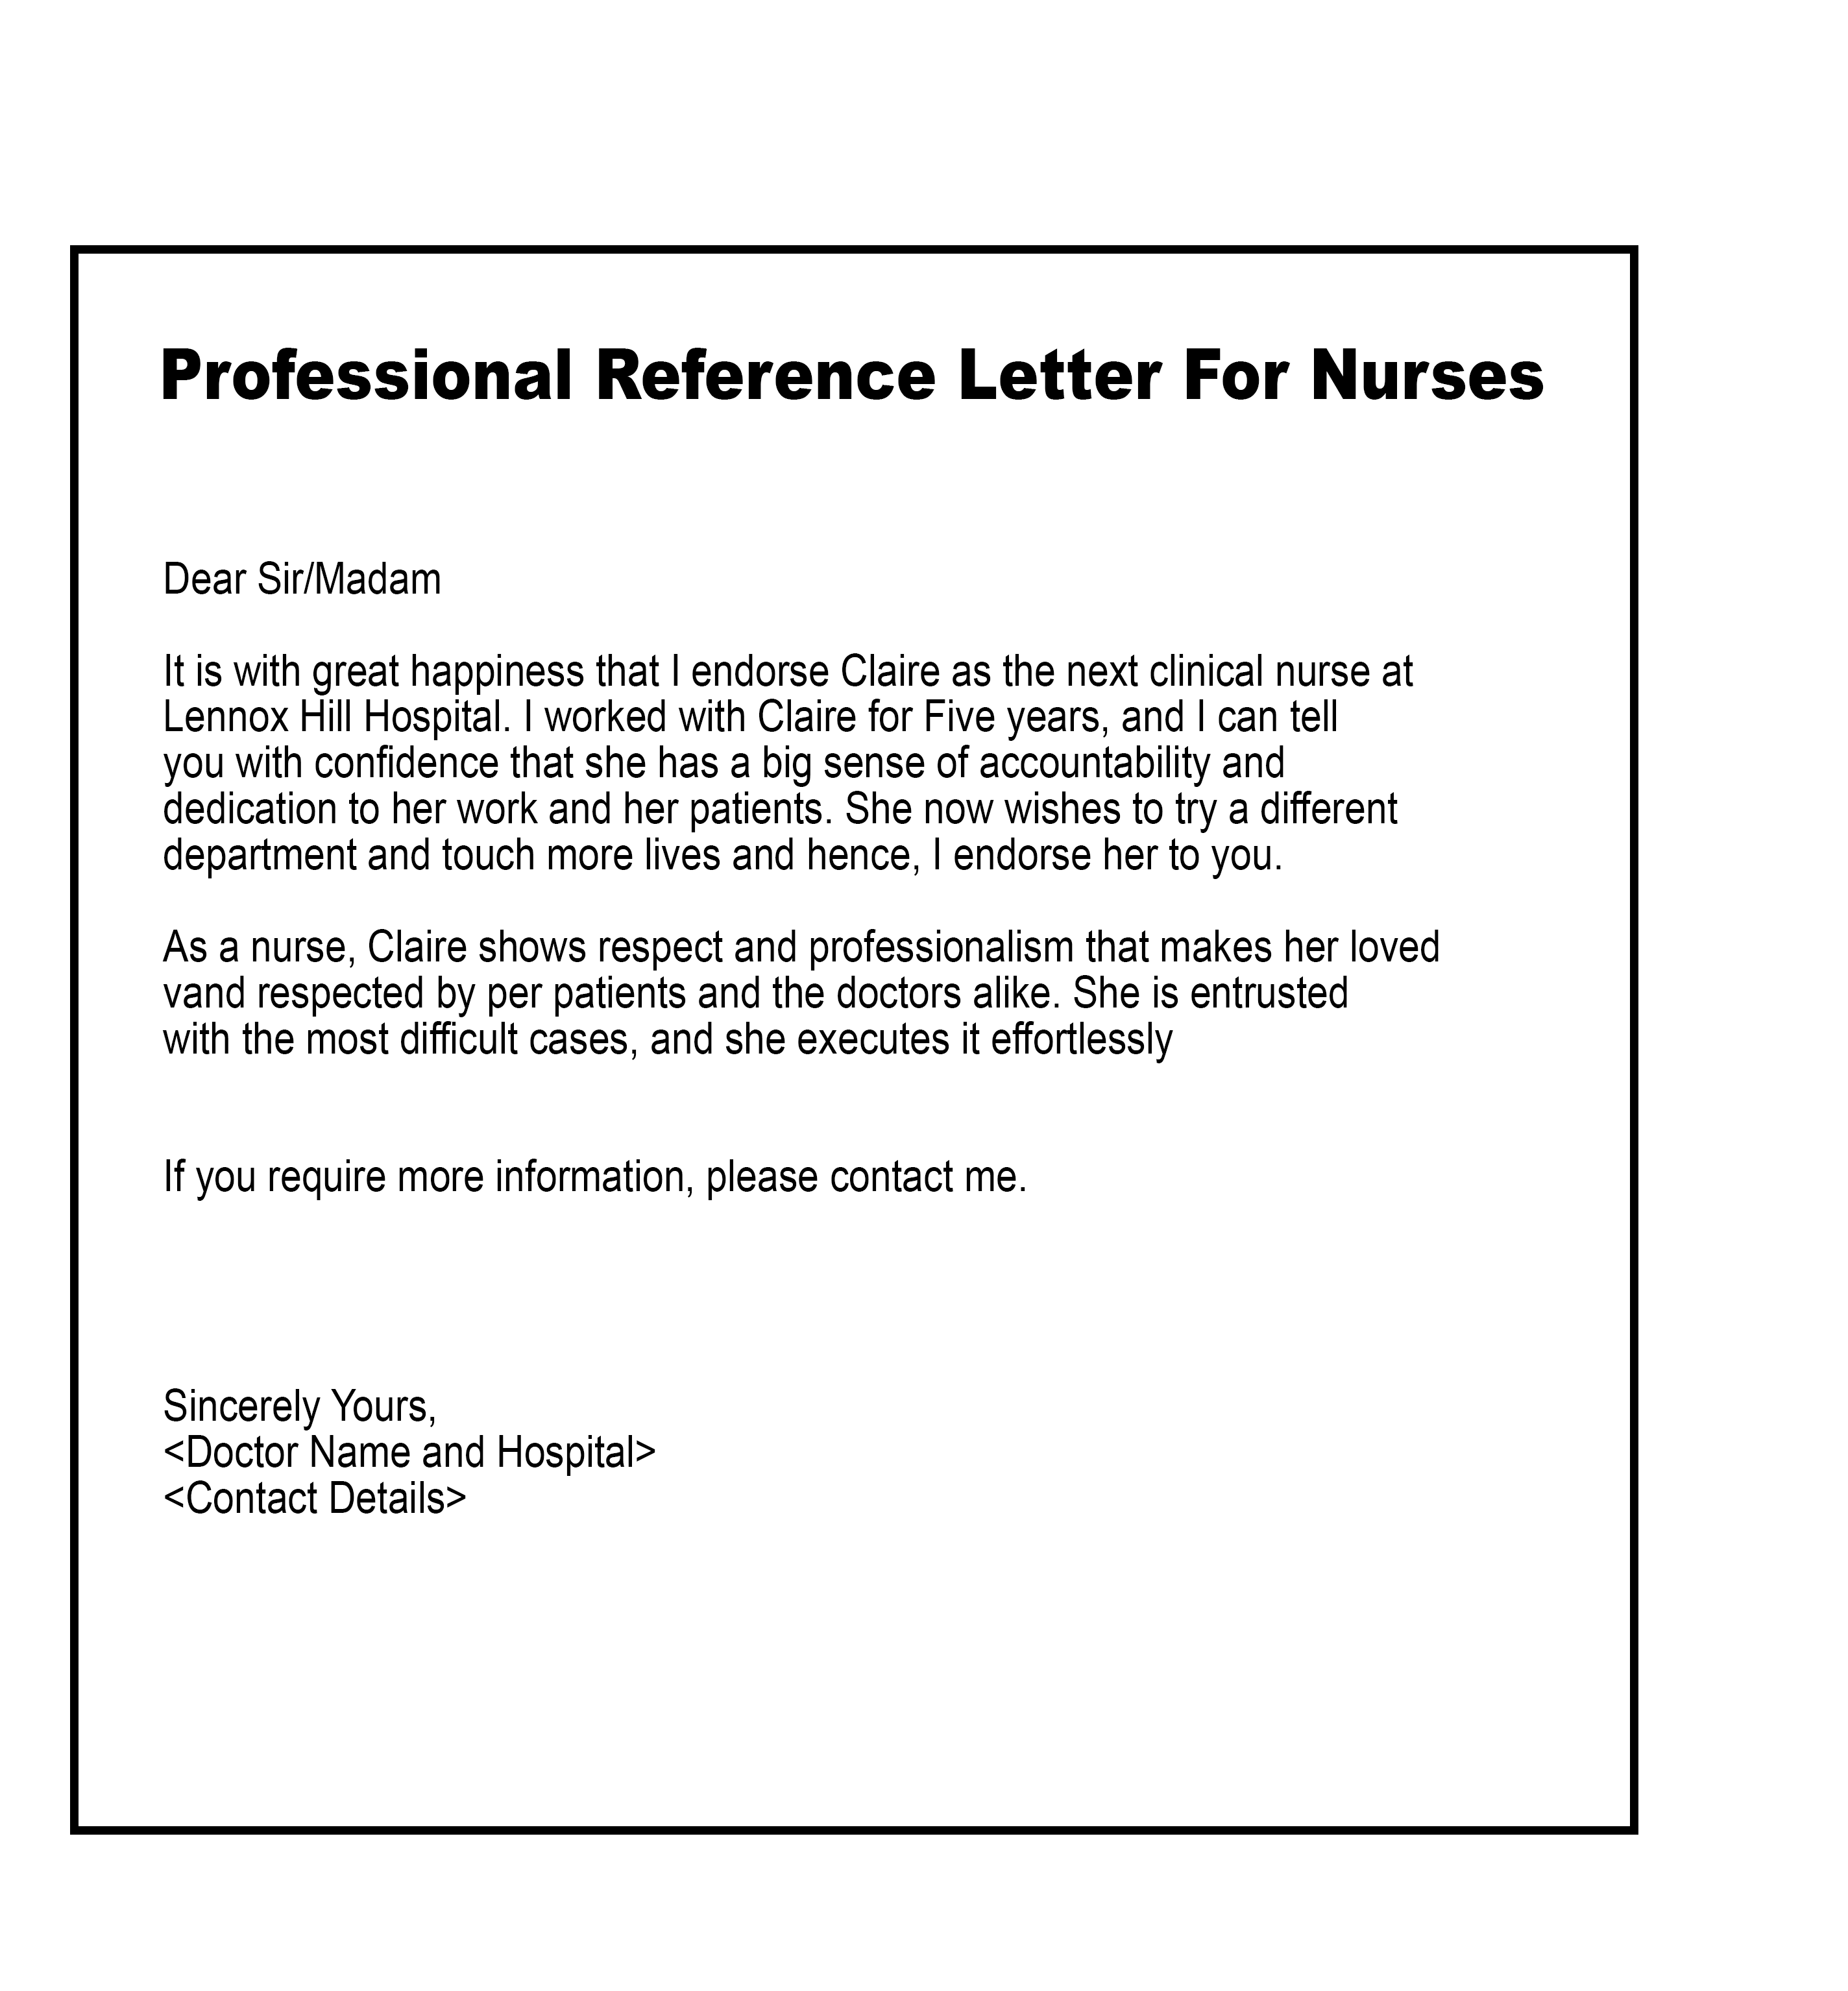 Professional Reference Letter For Nurses